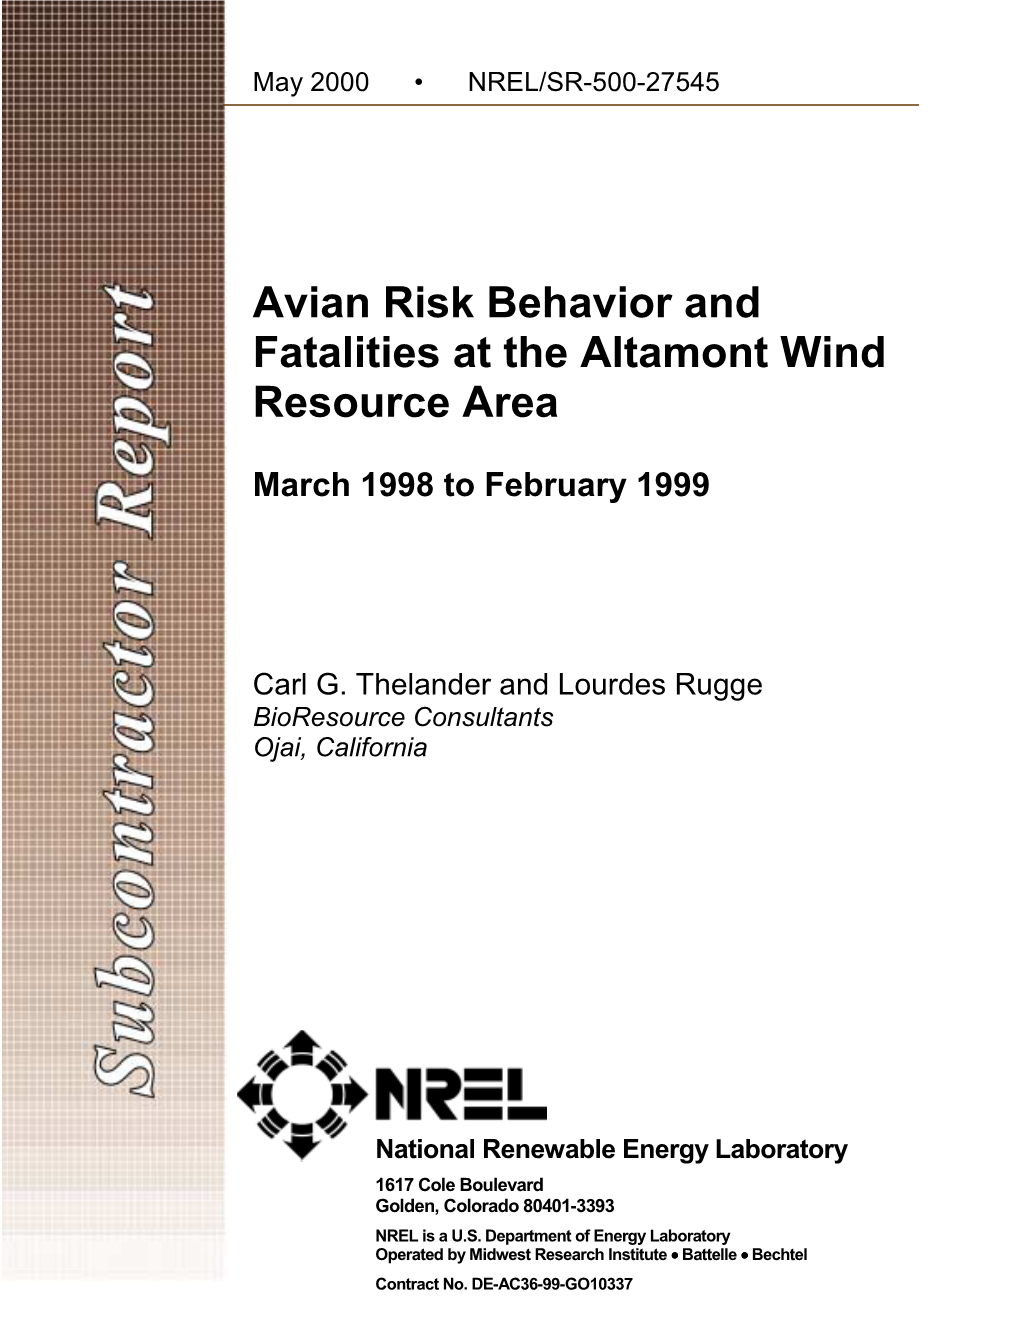 Avian Risk Behavior and Fatalities at the Altamont Wind Resource Area